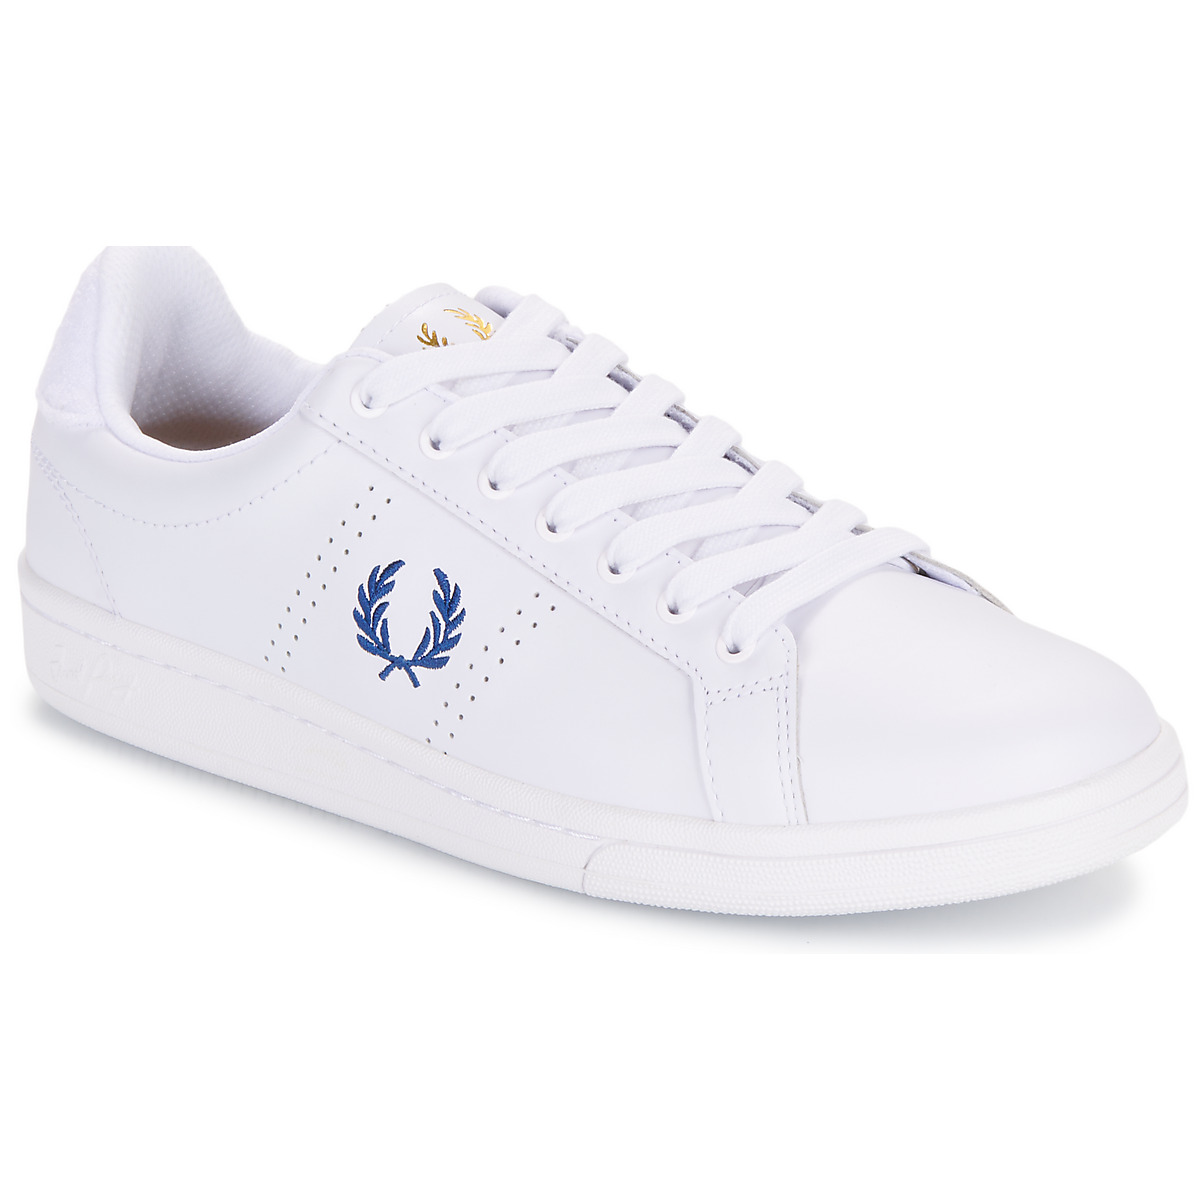 Fred Perry B721 Leather / Towelling White